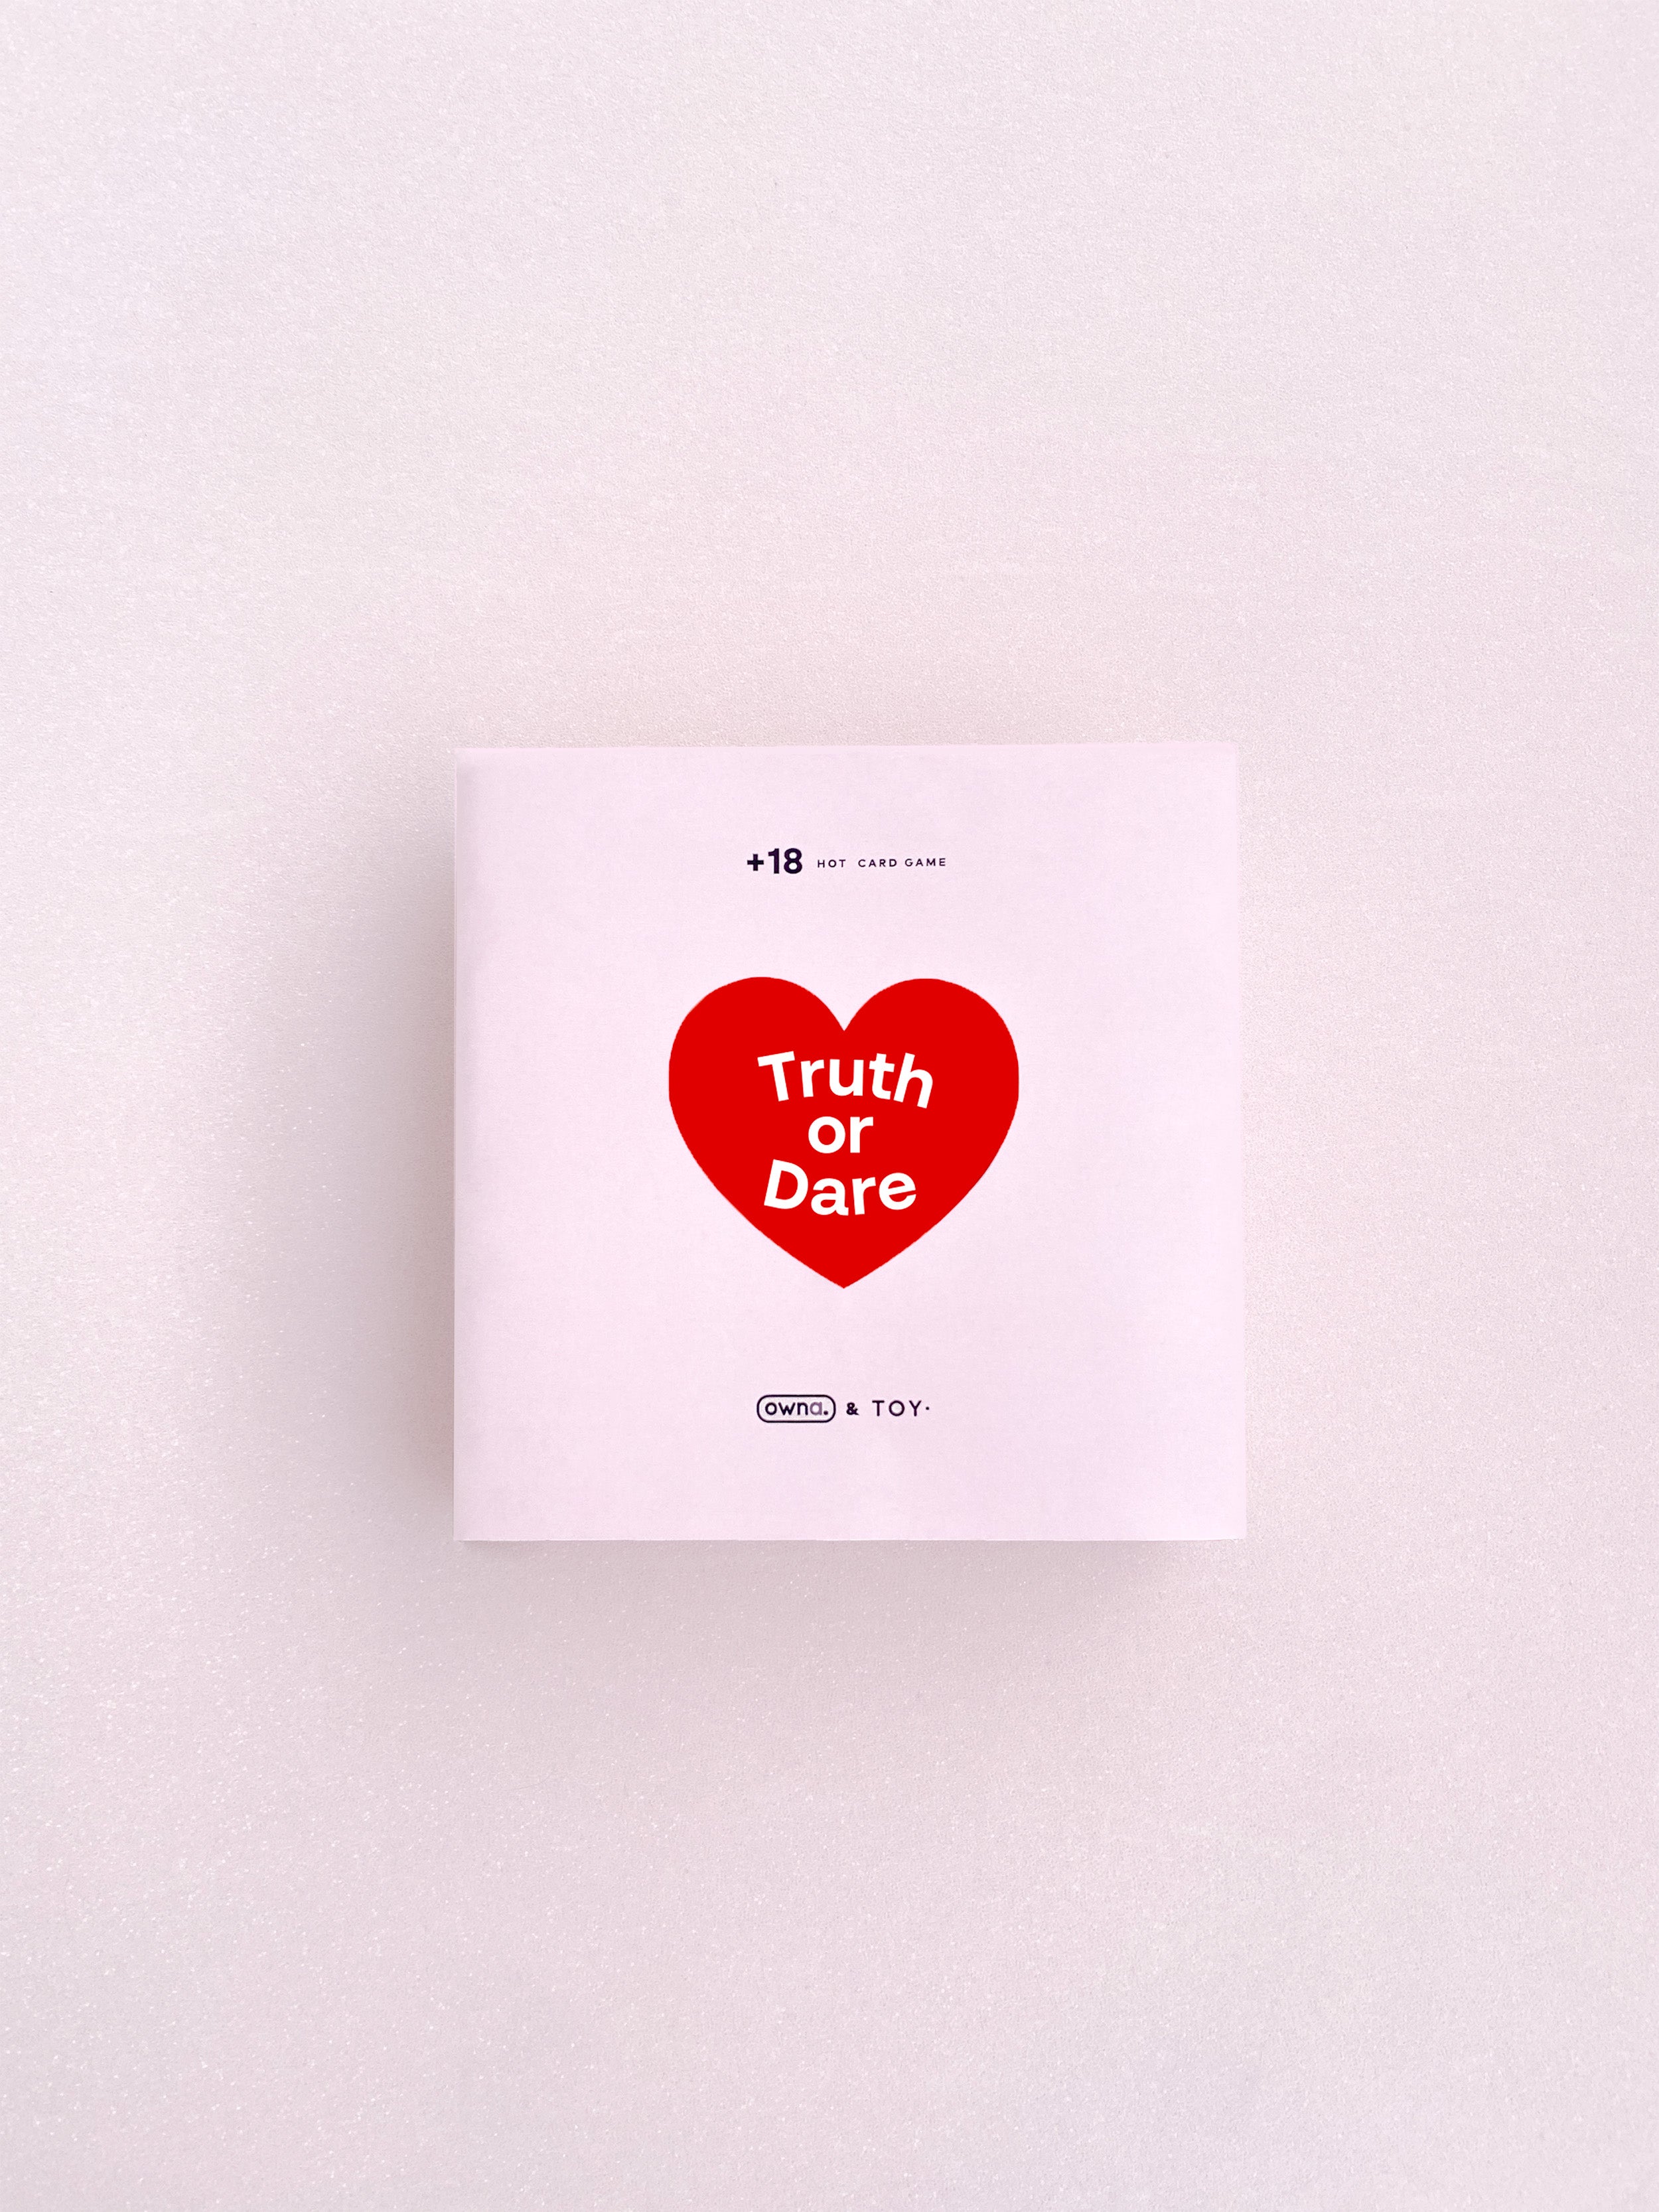 TRUTH OR DARE PLAYING CARDS (OWNA x TOY) - PREVENTA